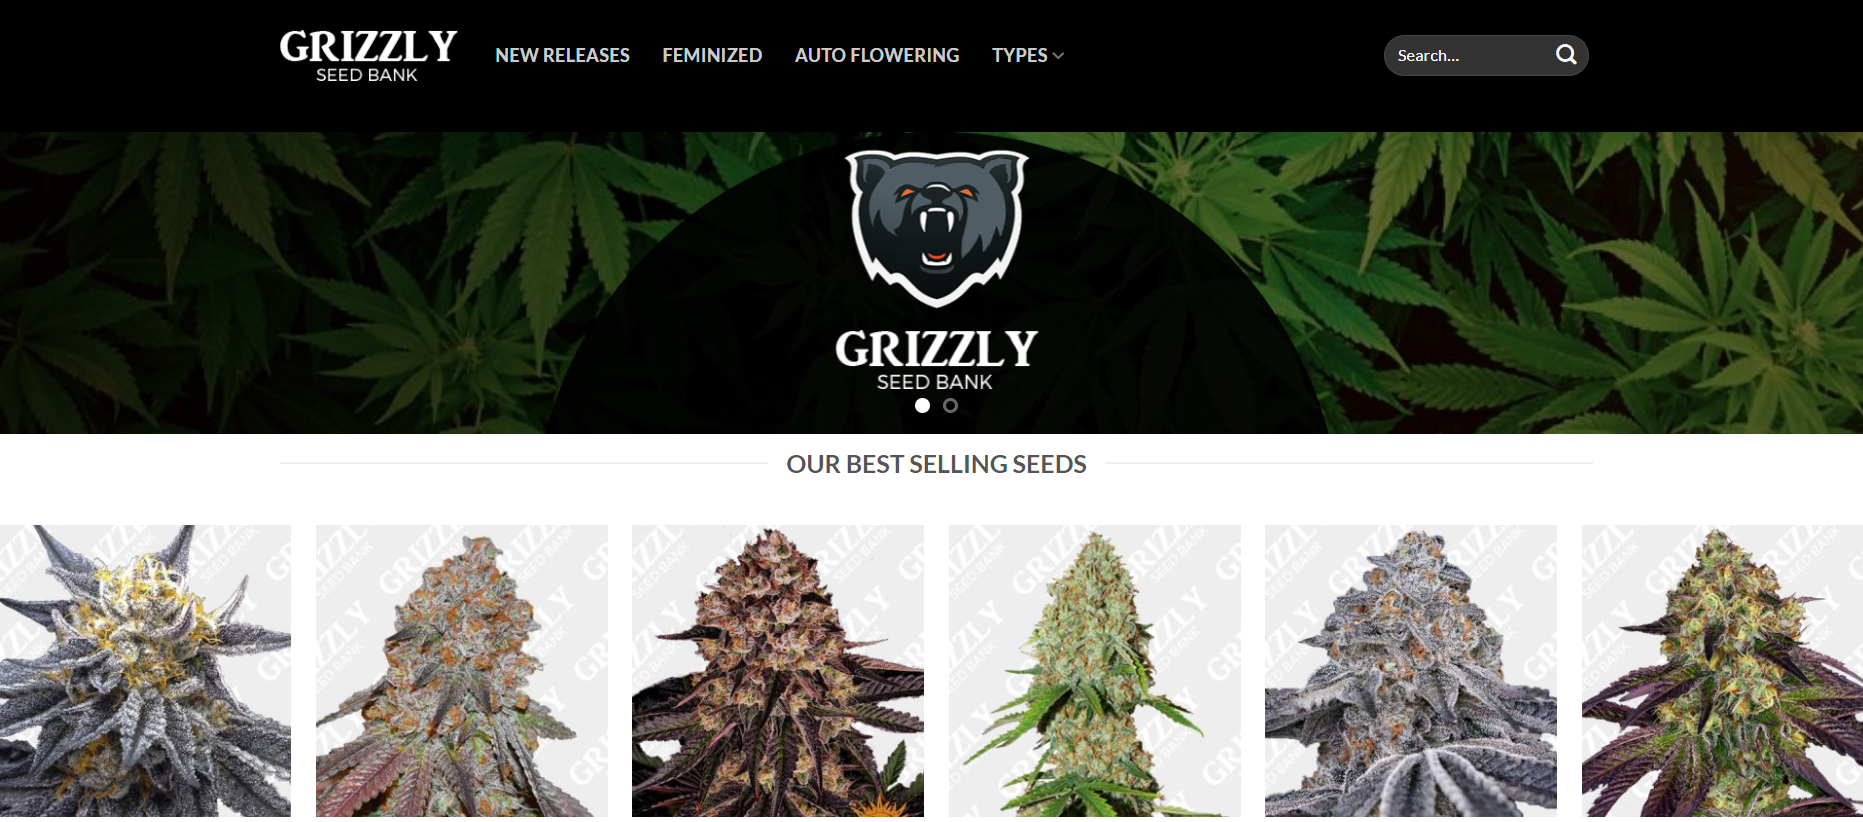 Grizzly Cannabis Seeds